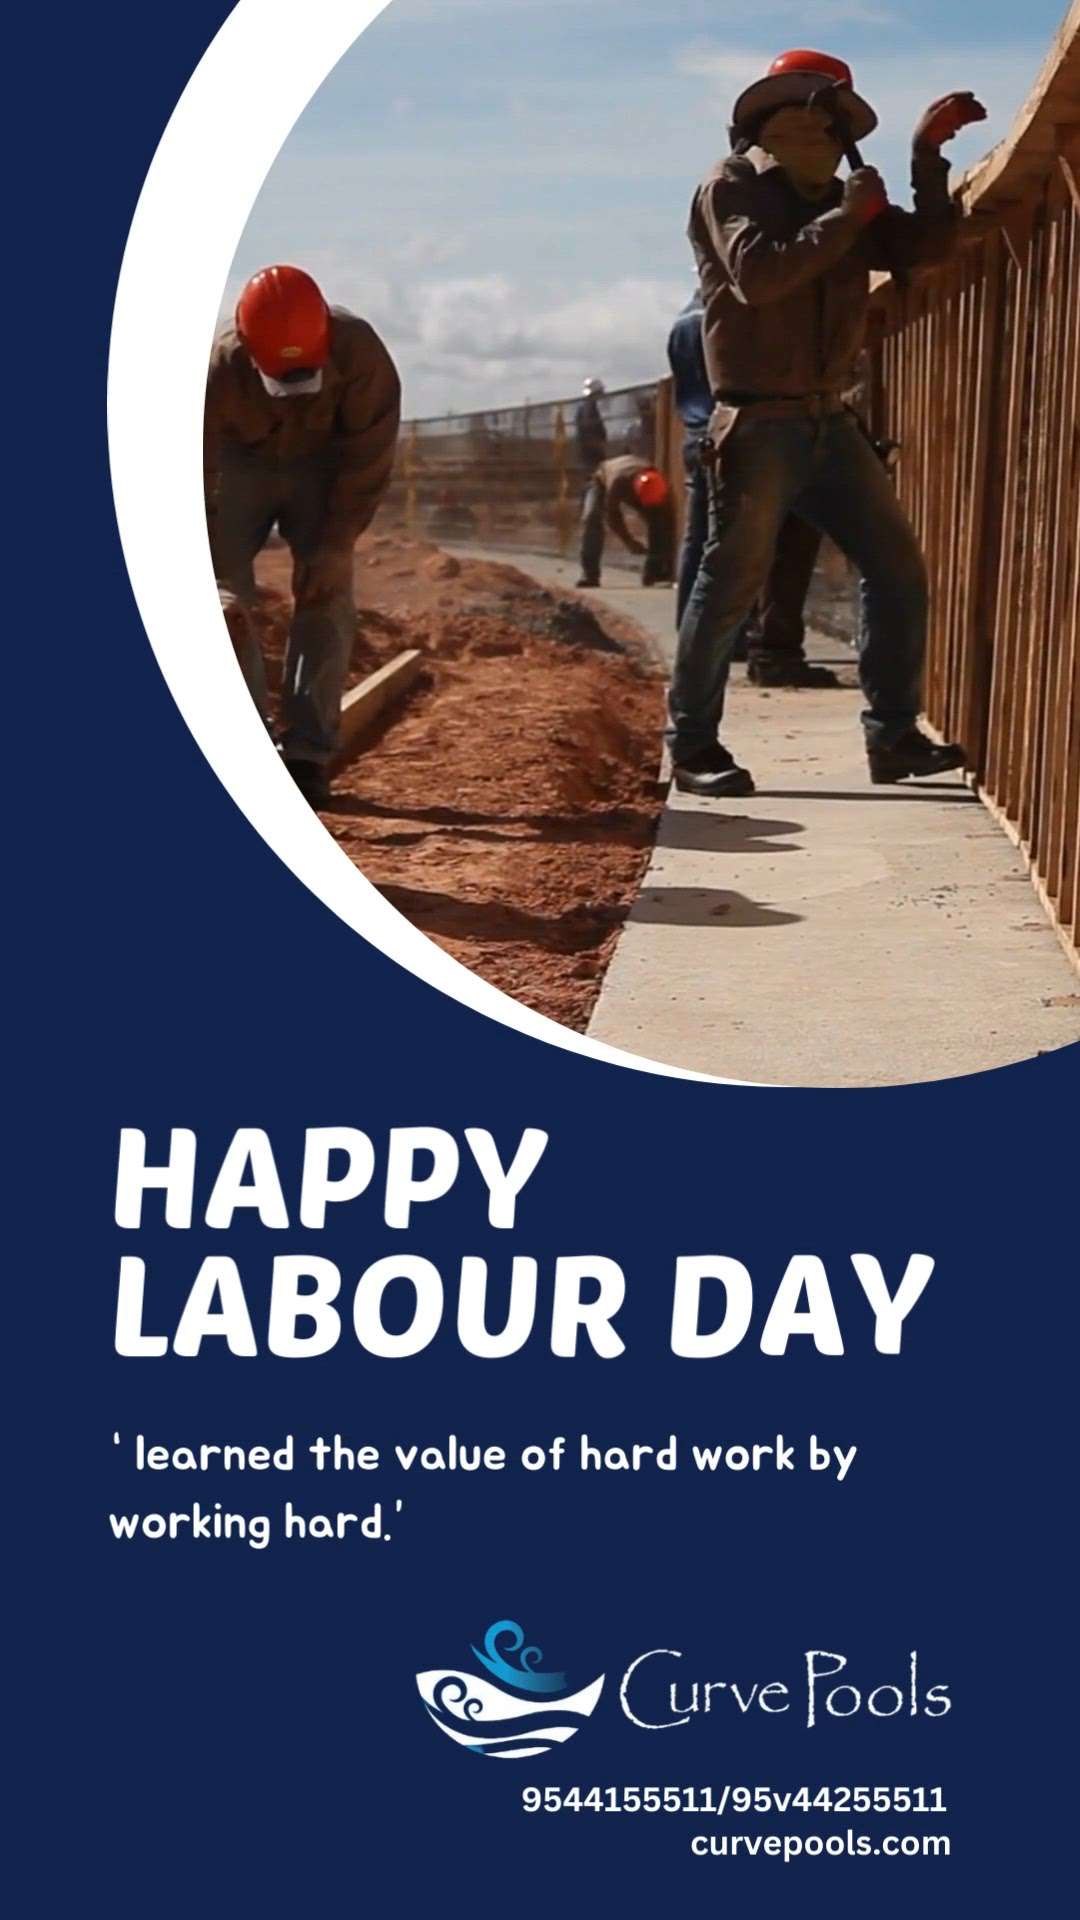 "Without workers, no civilisation could be built!” 

 #laboursday#workers#srength

Uplift your water spirit through CURVE POOLS INDIA PVT LTD
..
..
.
.
Visit us :
Www.curvepools.com
Info@curvepools.com
Fb: Curvepools India Pvt Ltd
Insta : curvepools_india_pvt_ltd
Ph: 9544255511/9544155511

 #swimmingpoolconstructionconpany #swimmingpoolwork  #swimmingpoolbuilders  #swimmingpooltiles